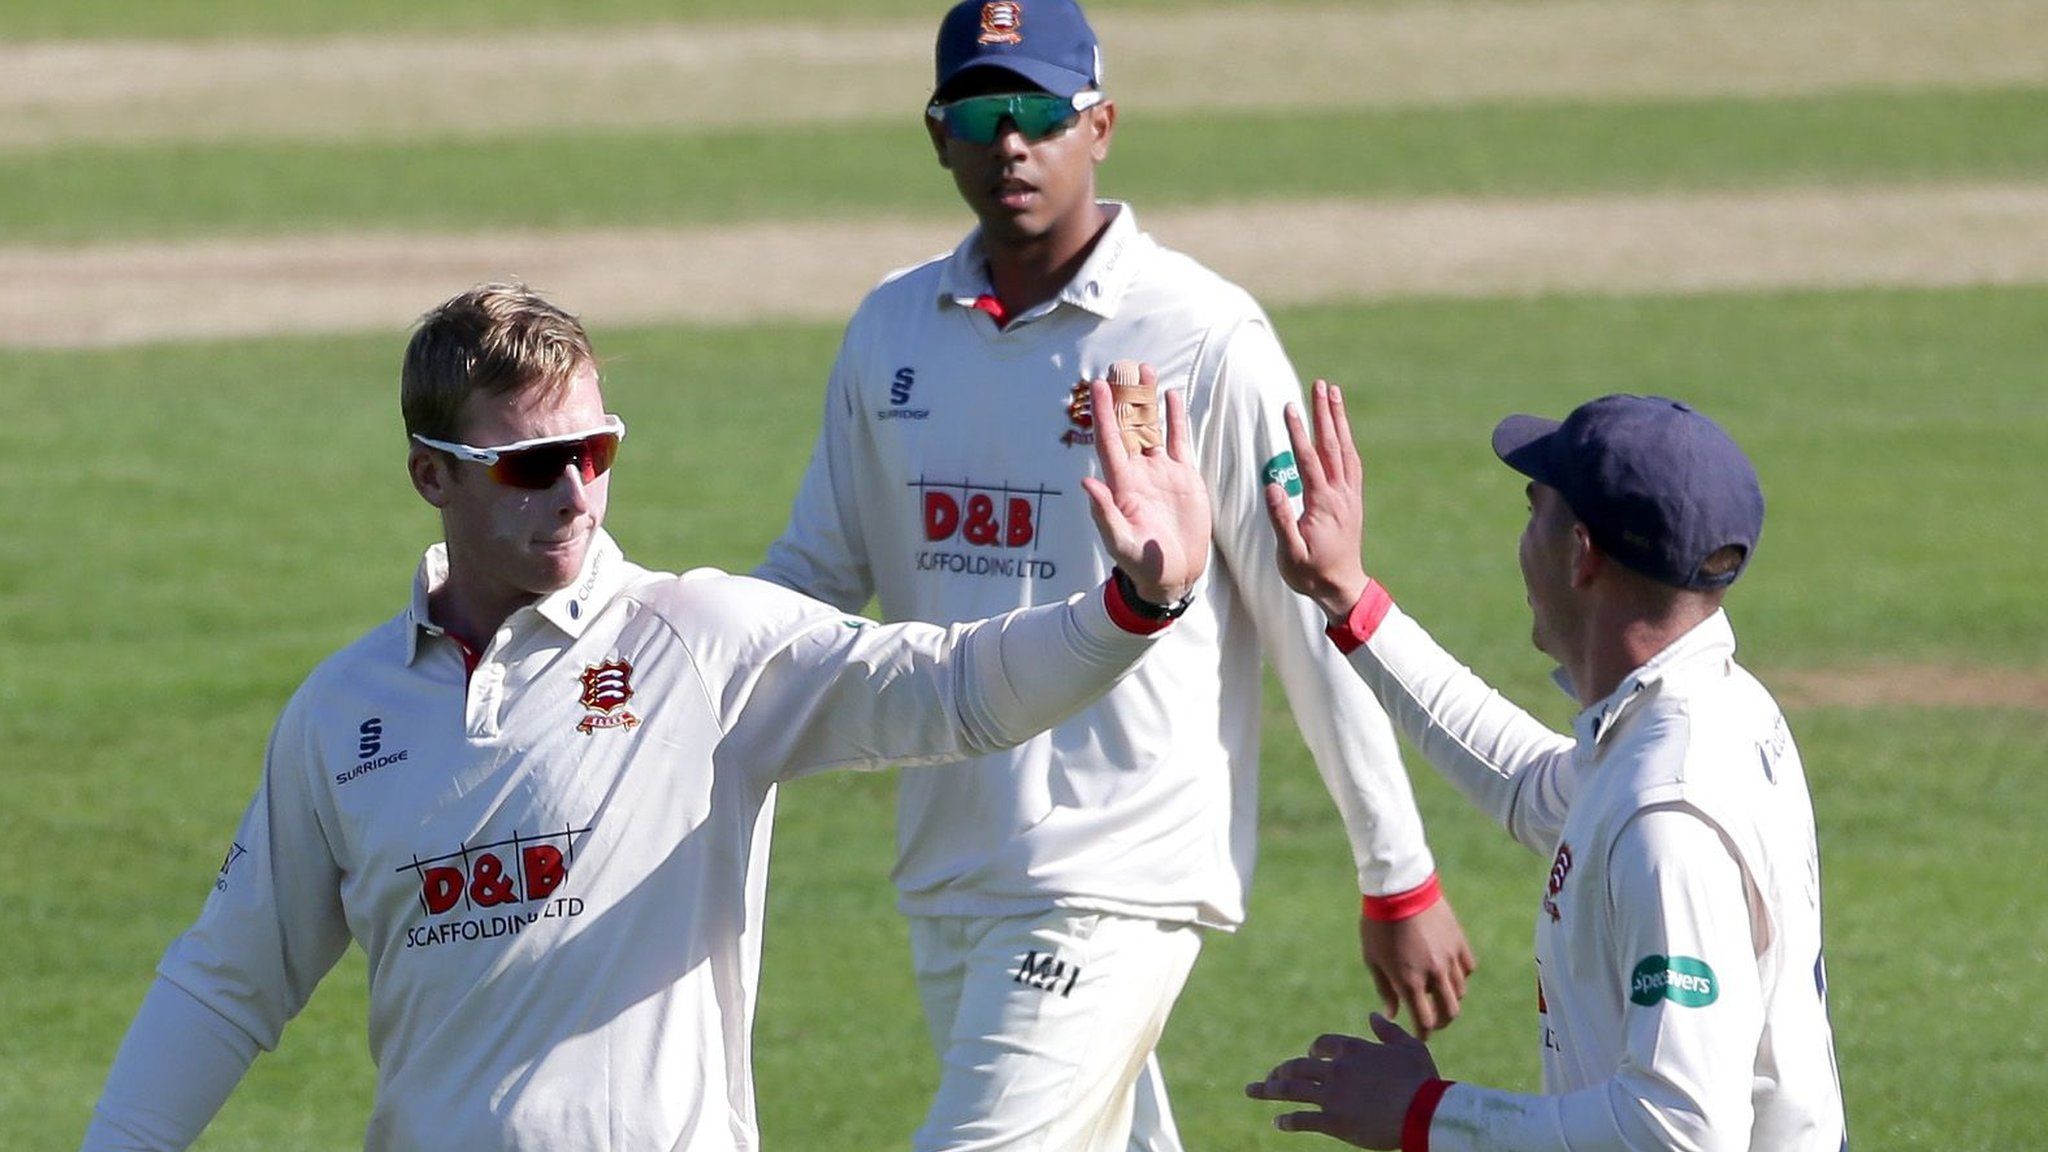 Essex spinner Simon Harmer took four wickets after scoring 43 valuable runs